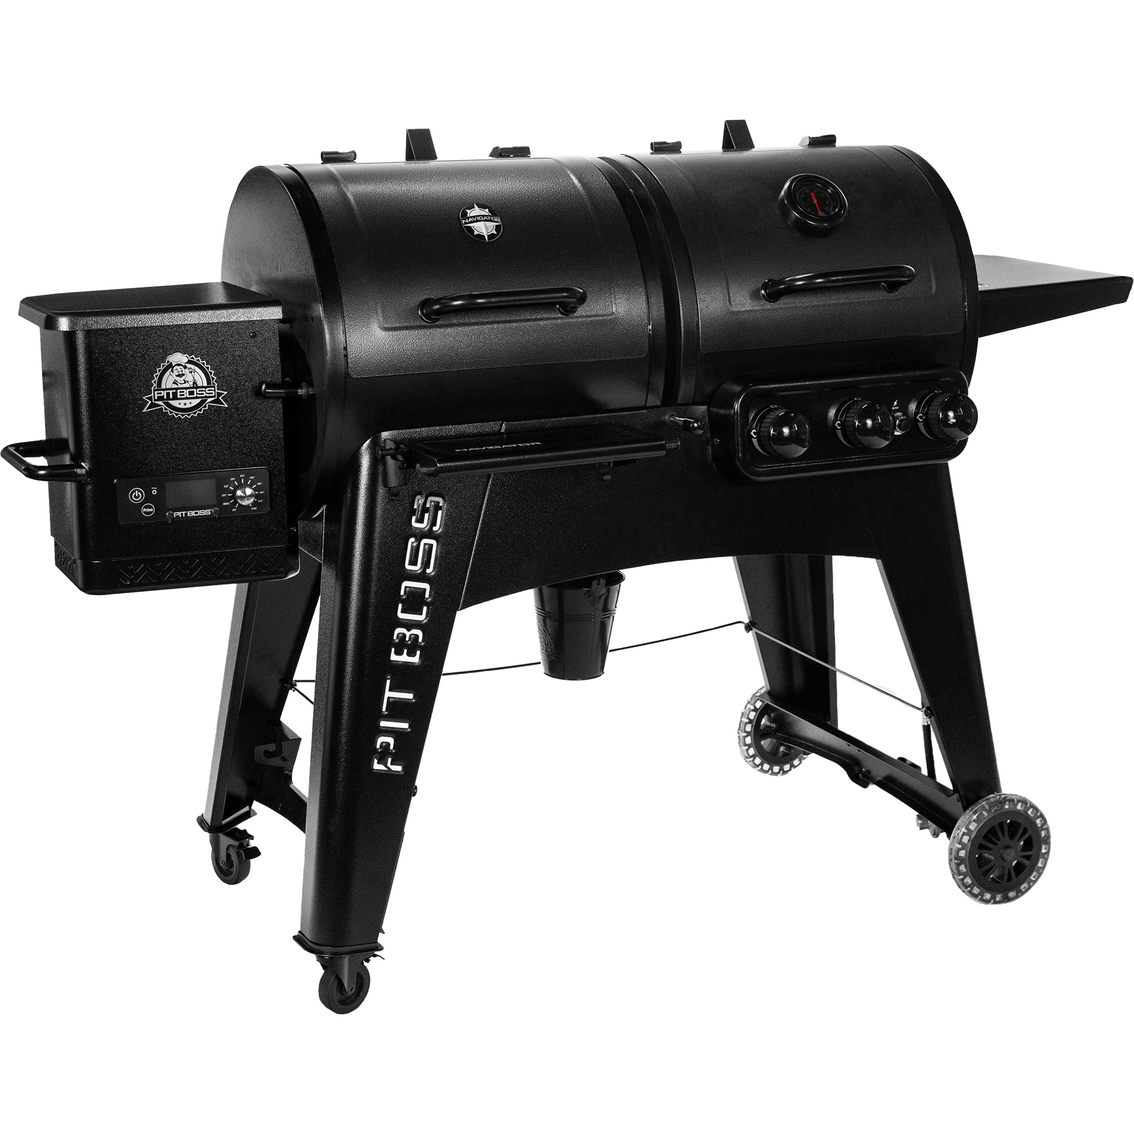 Pit Boss Combo 1230 Wood Pellet Grill - Image 1 of 6